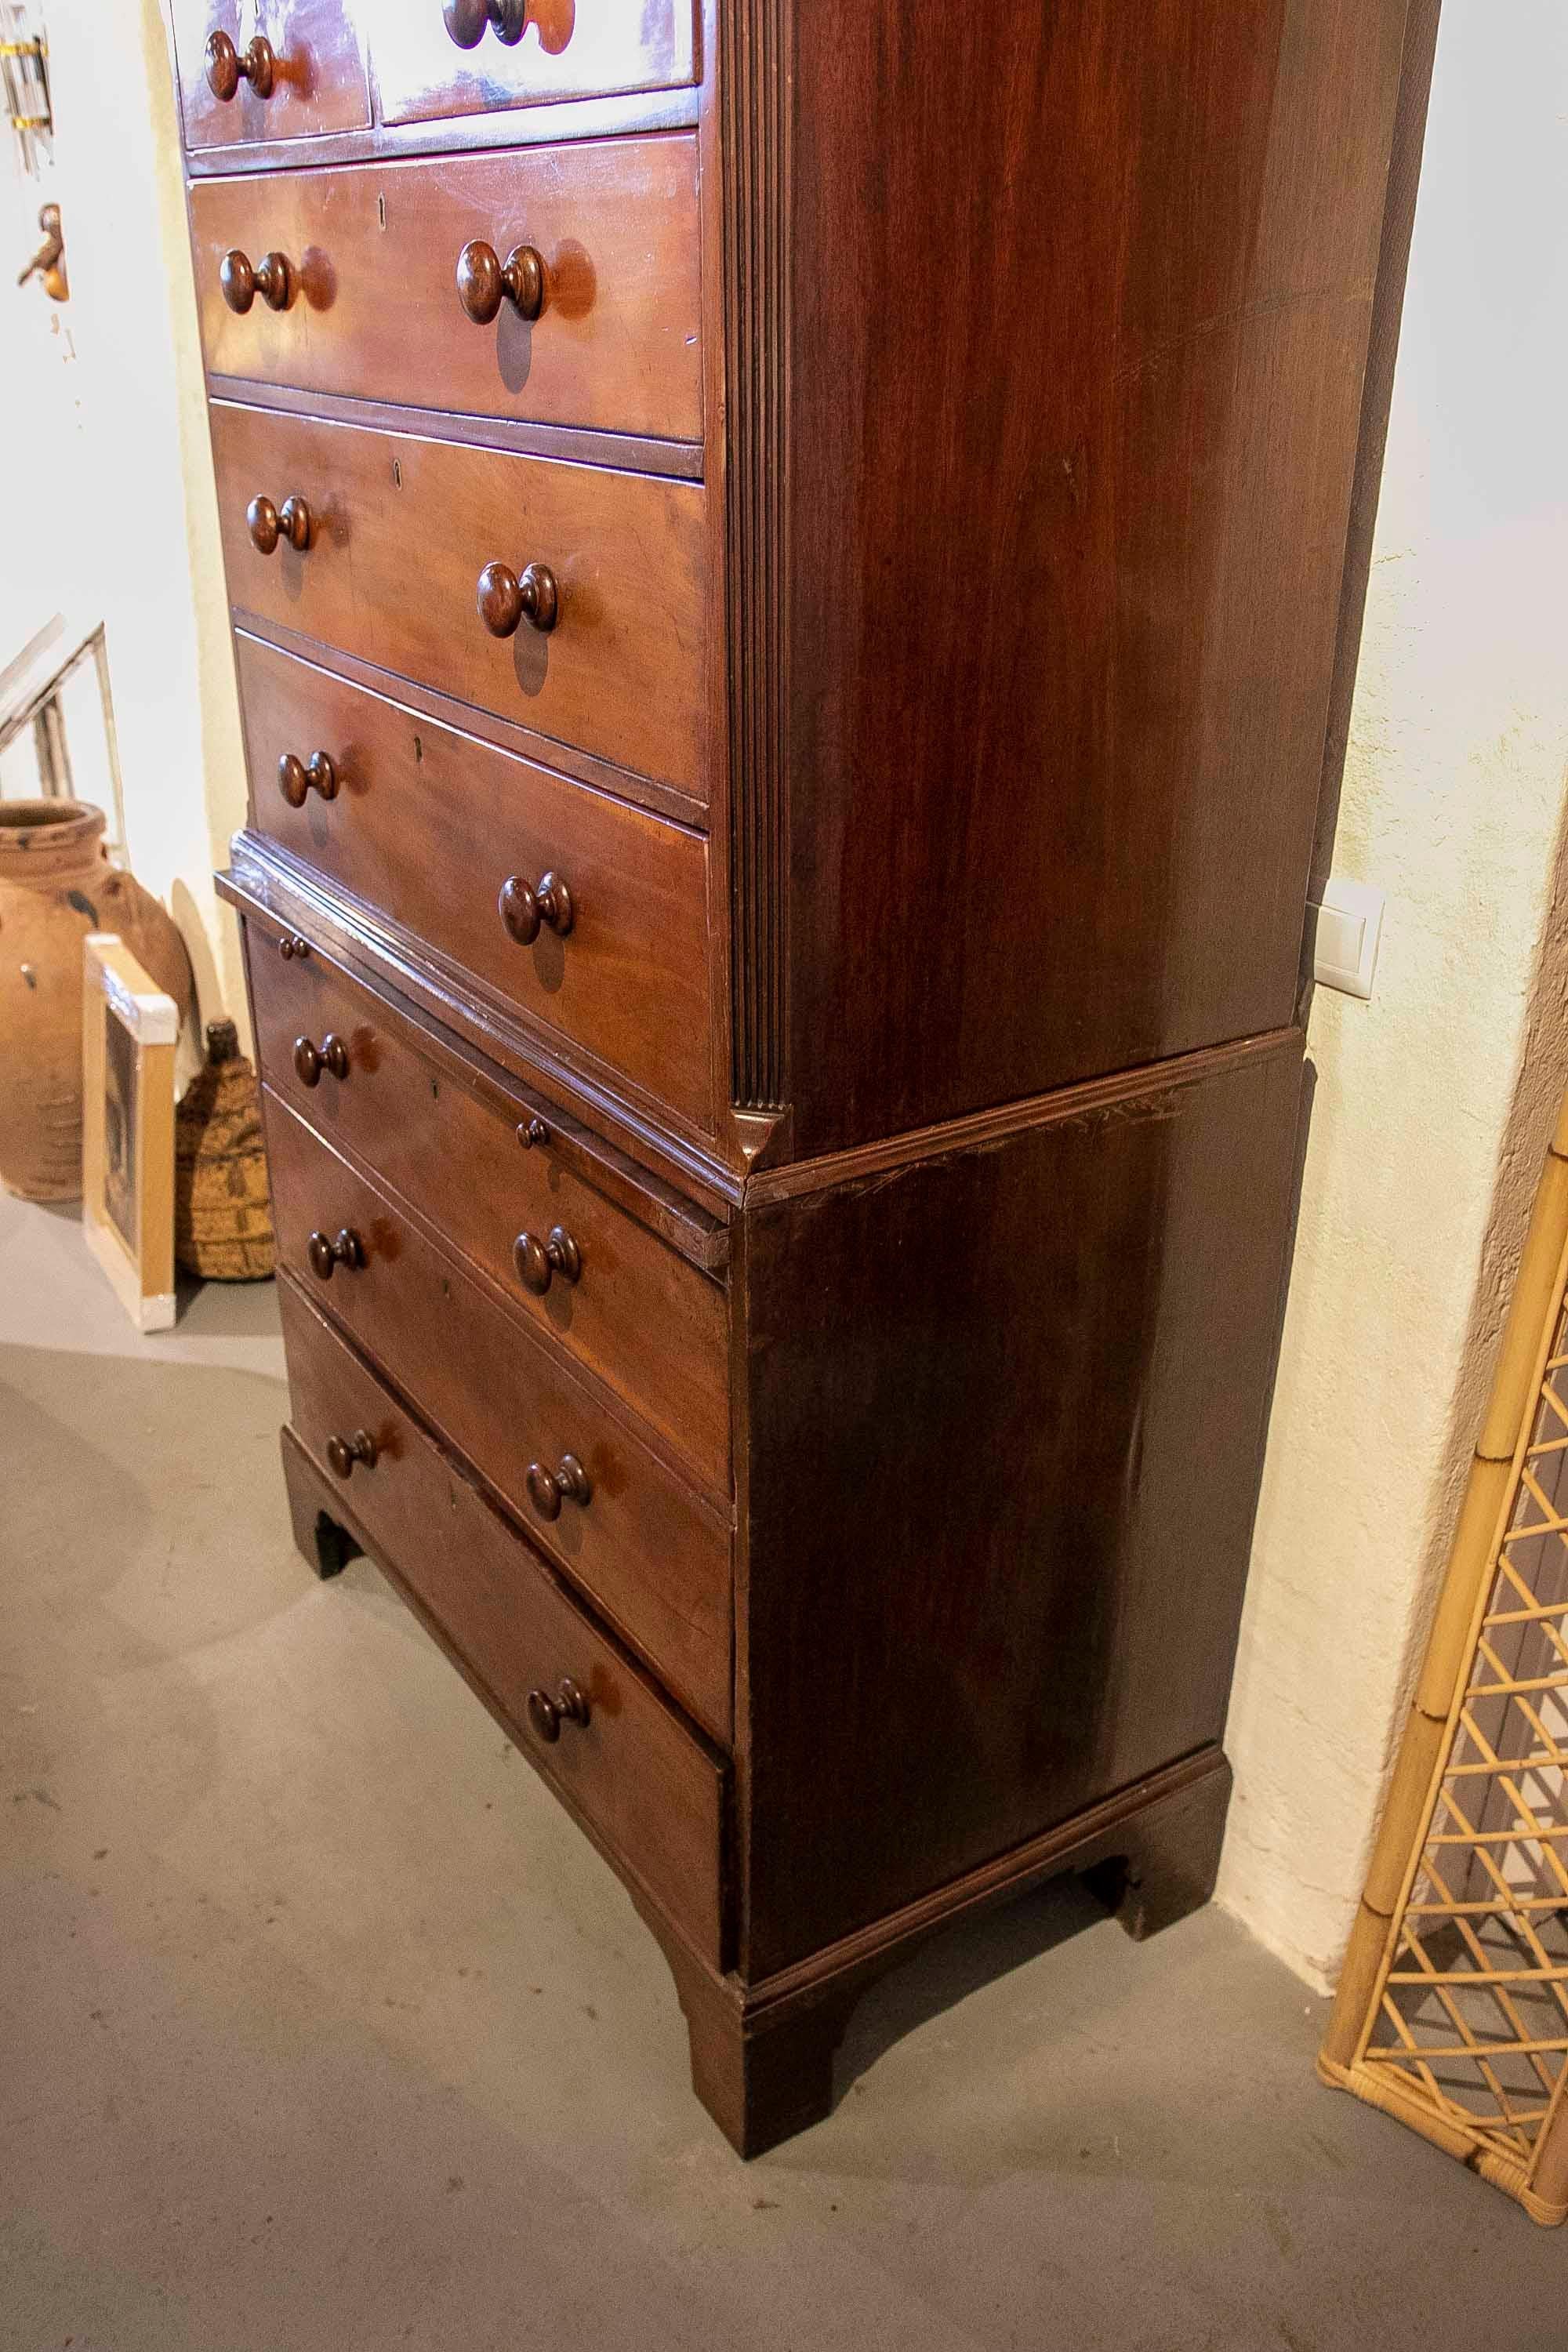 19th Century Chest of Drawers - English Mahogany Two-body Desk For Sale 18